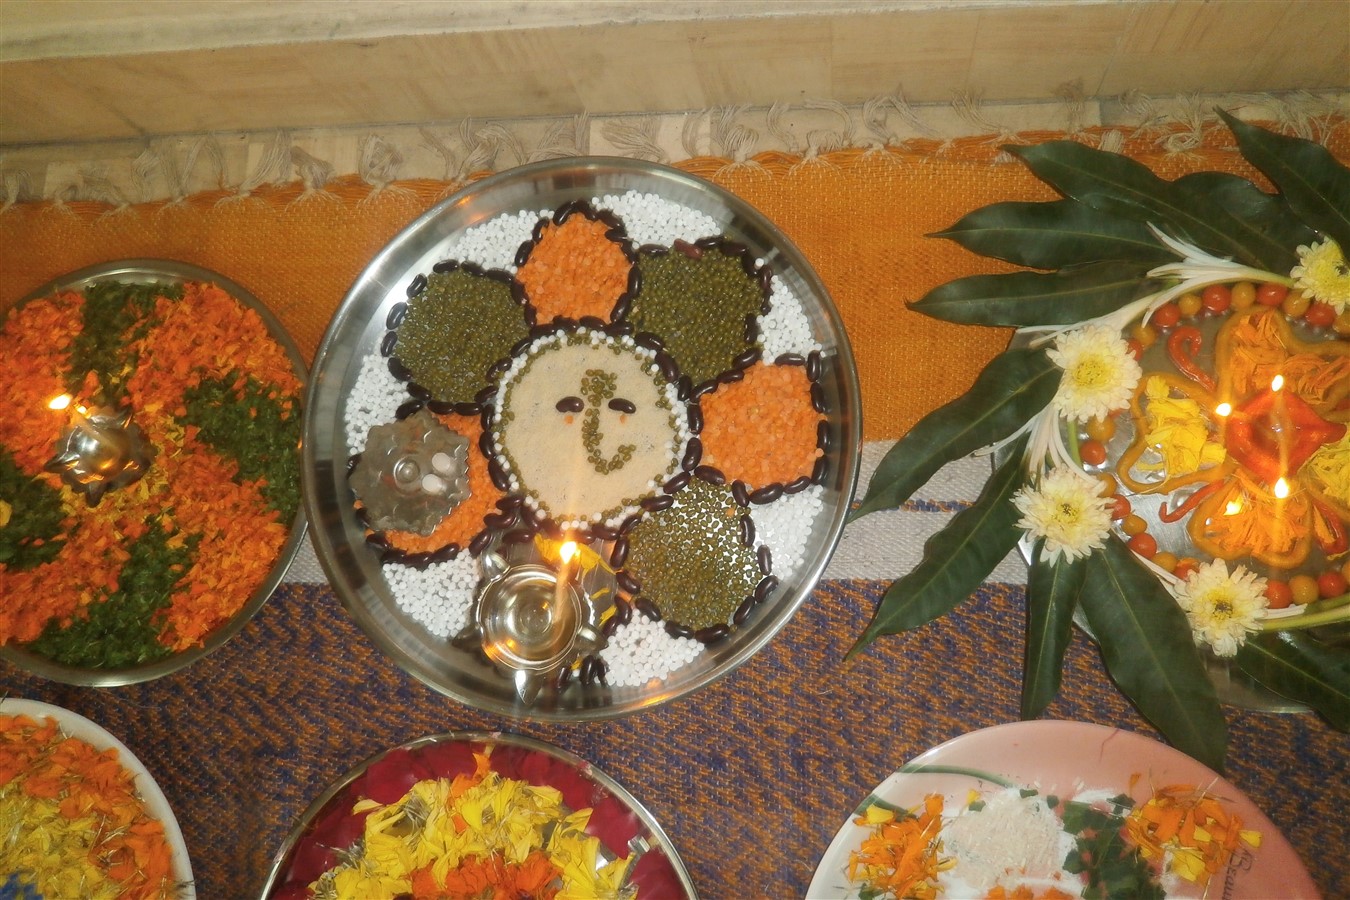 Different creative ways to decorate the thali